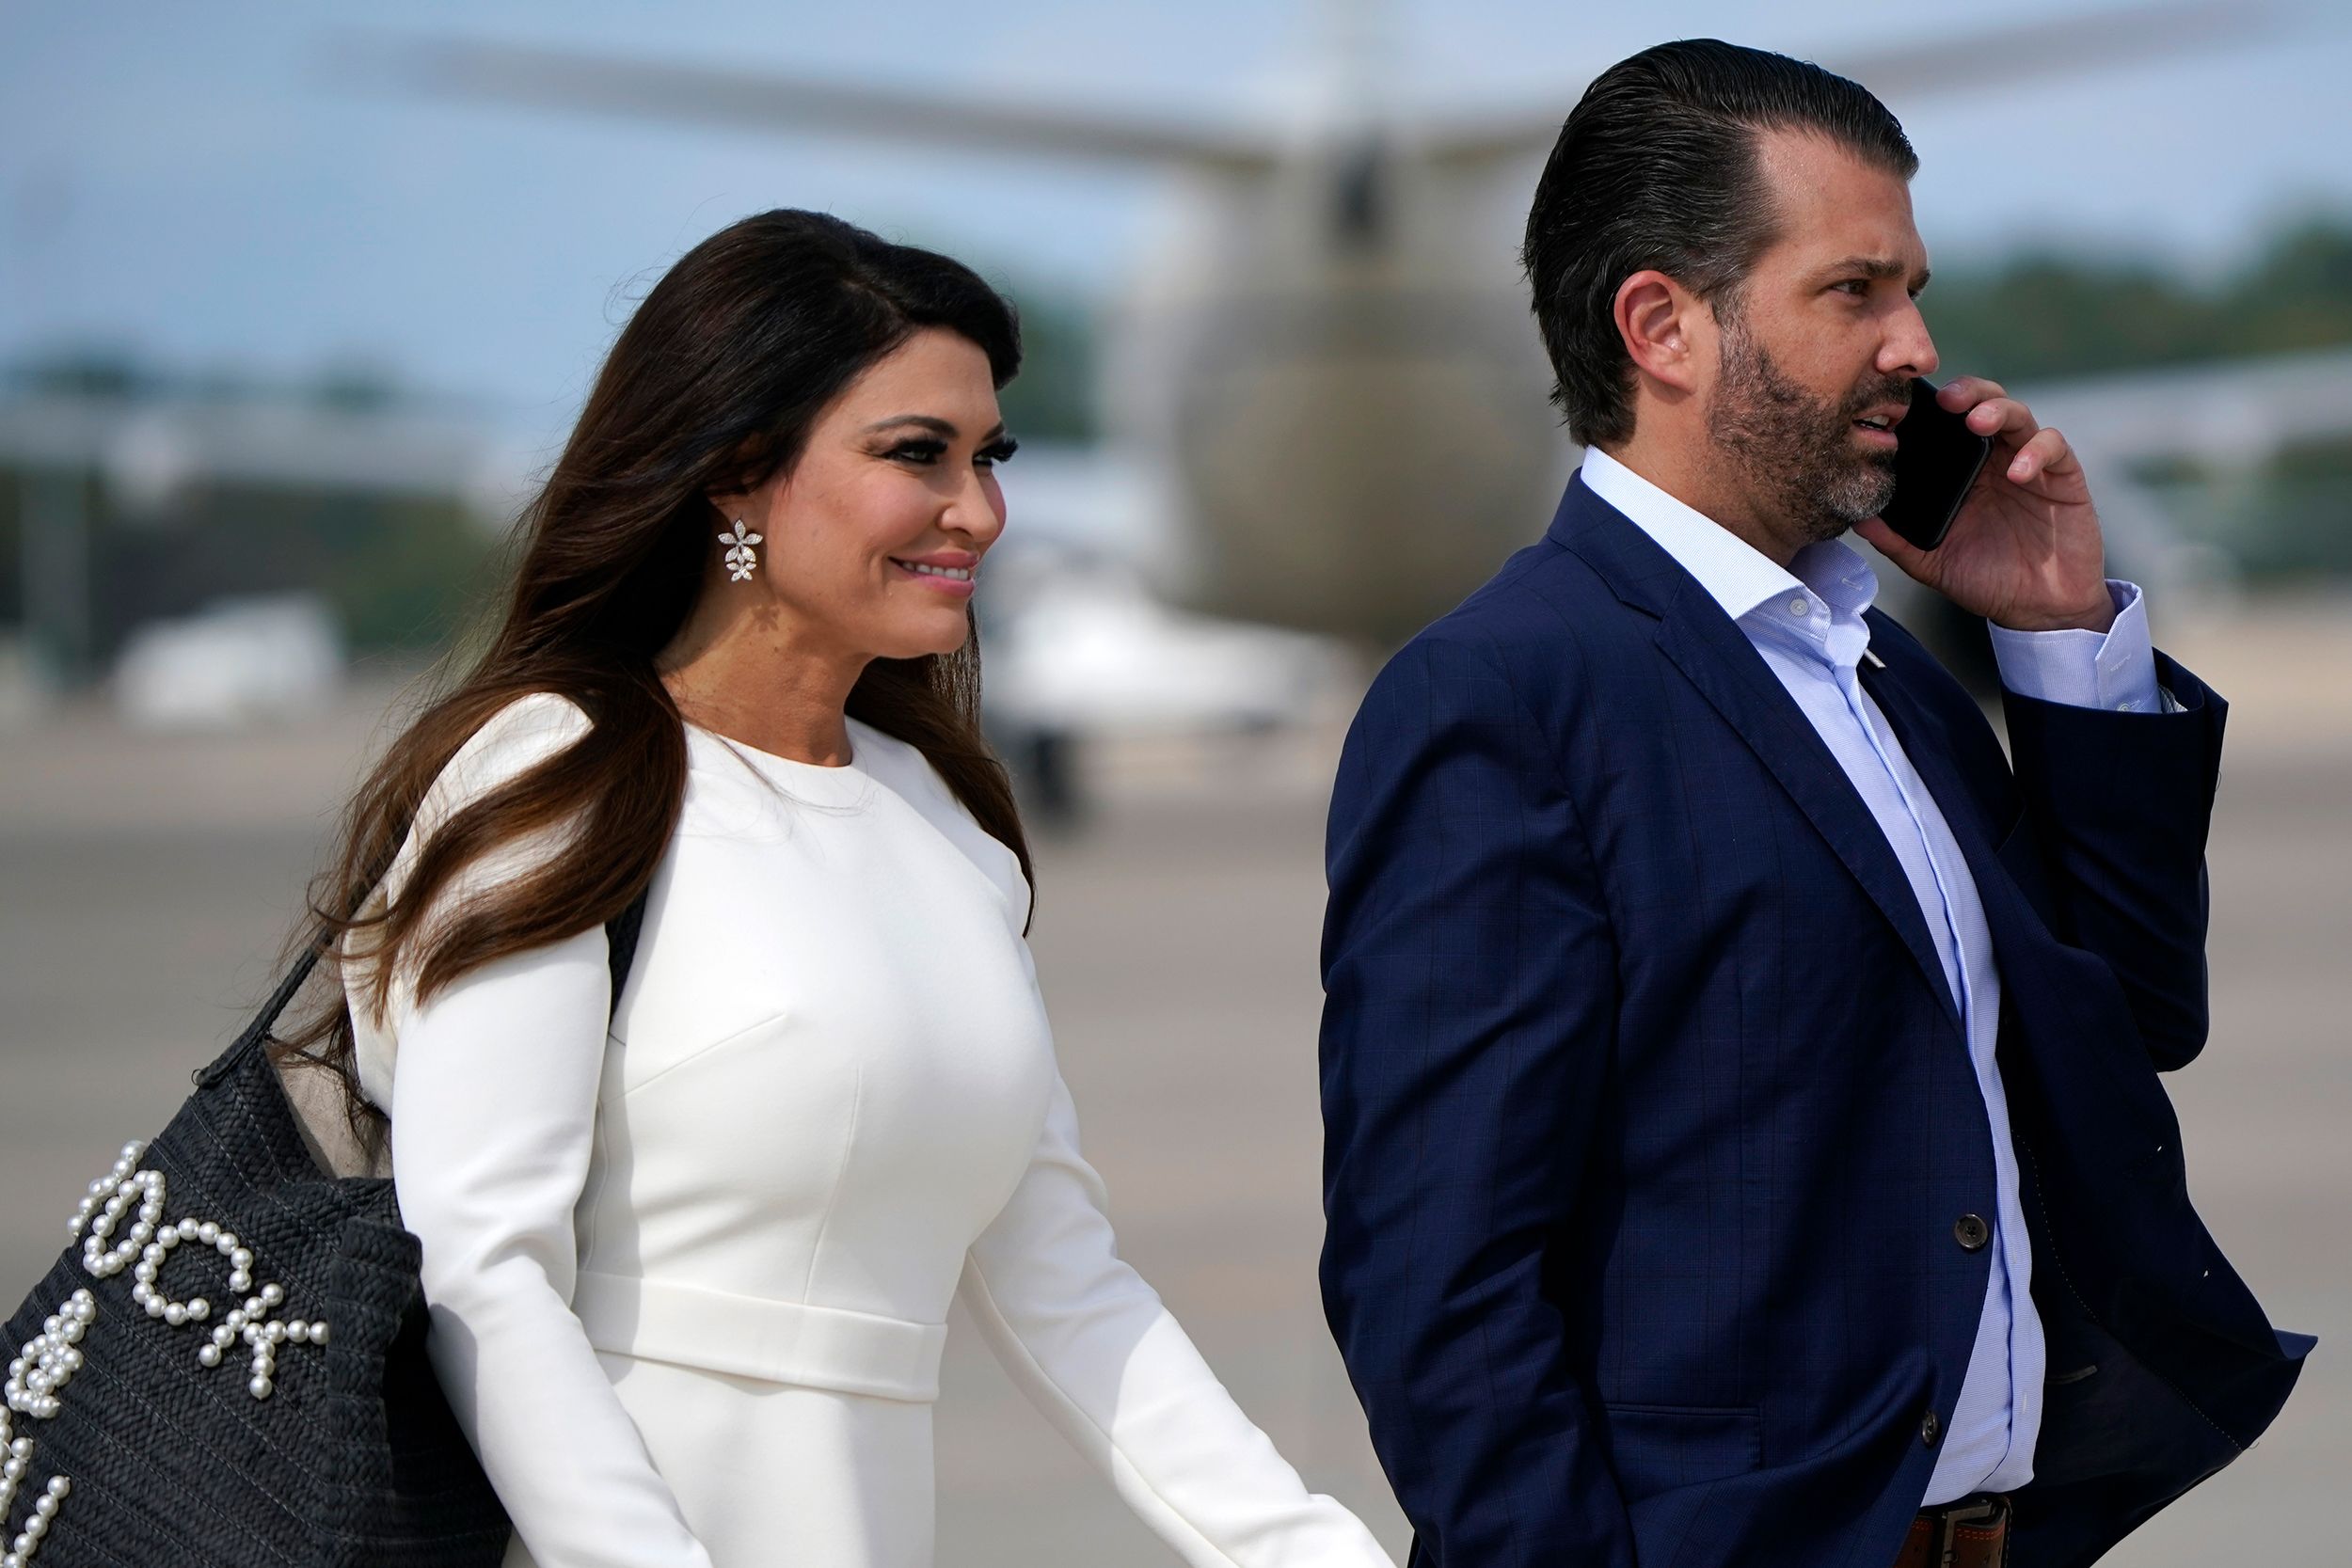 Kimberly Guilfoyle Porn Sucks - Fox News paid Kimberly Guilfoyle's former assistant $4 million after sexual  harassment accusations, New Yorker reports | CNN Business